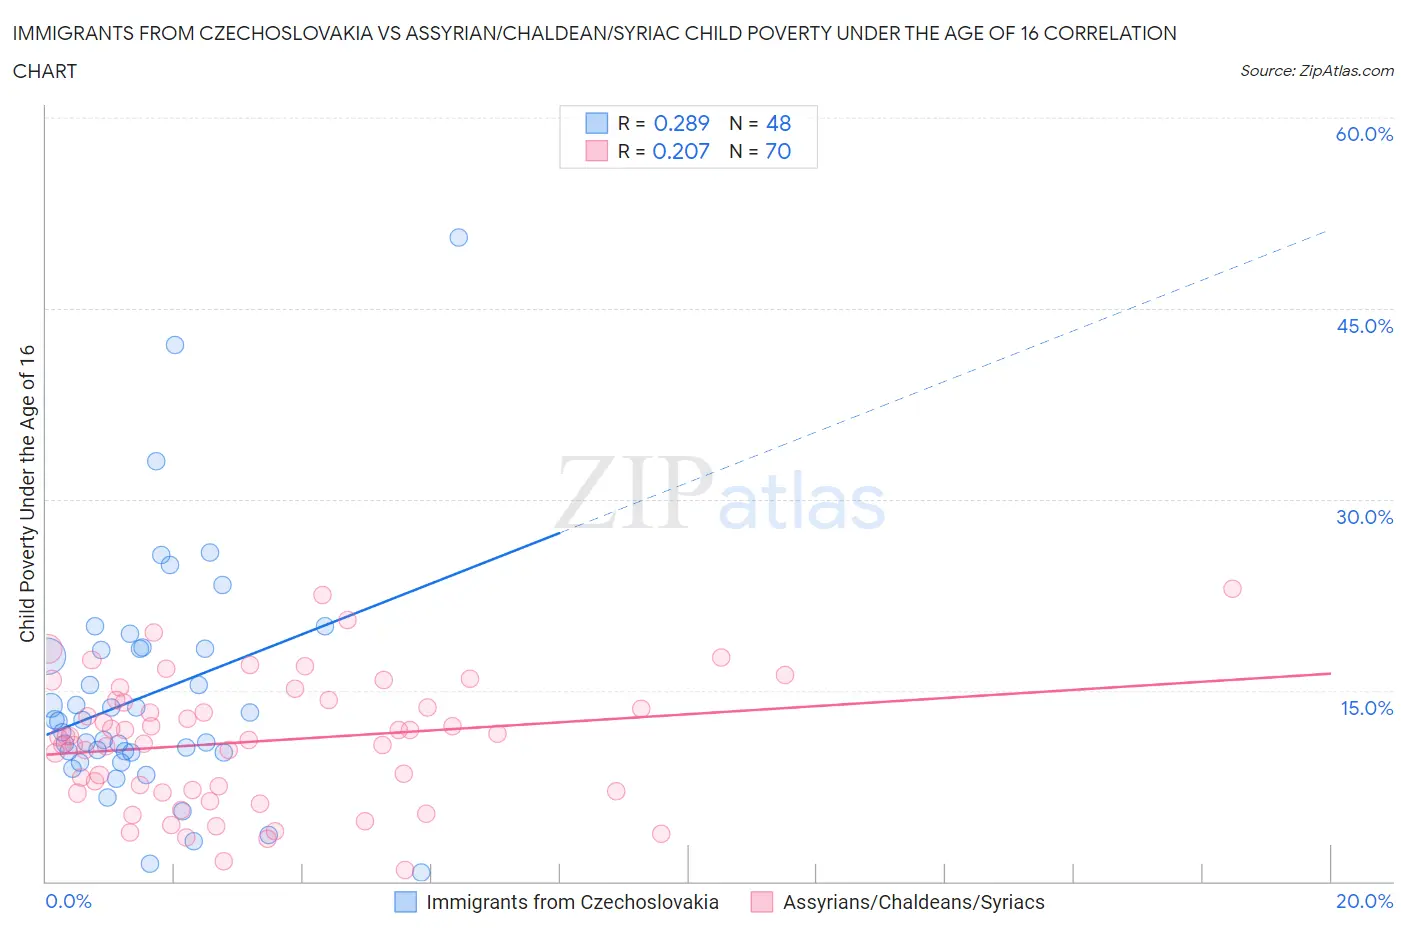 Immigrants from Czechoslovakia vs Assyrian/Chaldean/Syriac Child Poverty Under the Age of 16